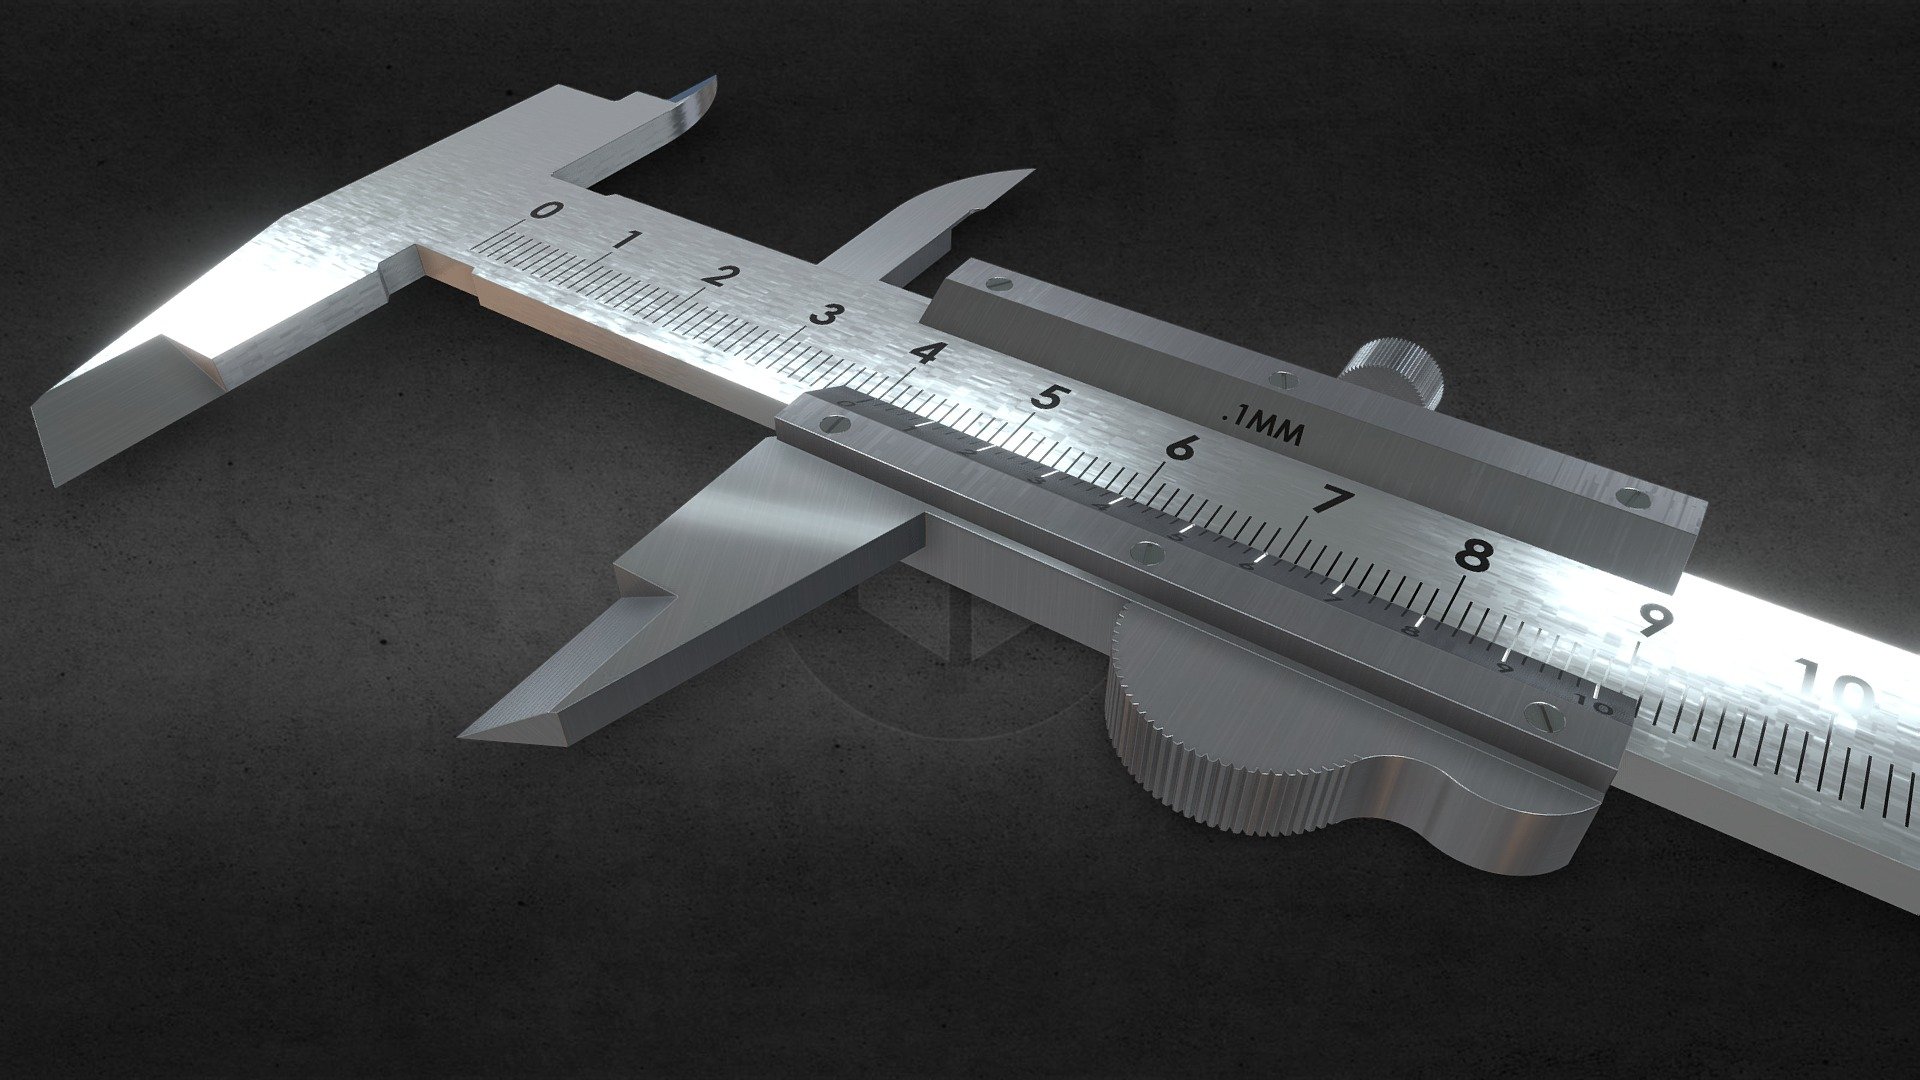 A vernier caliper is usually used to measure the diameter of circular objects. The circular jaws of the vernier caliper fits perfectly on the circumference of round objects. Vernier caliper consists of two scales, a main scale which is fixed and a moving vernier scale. The main scale has readings in millimeters 3d model